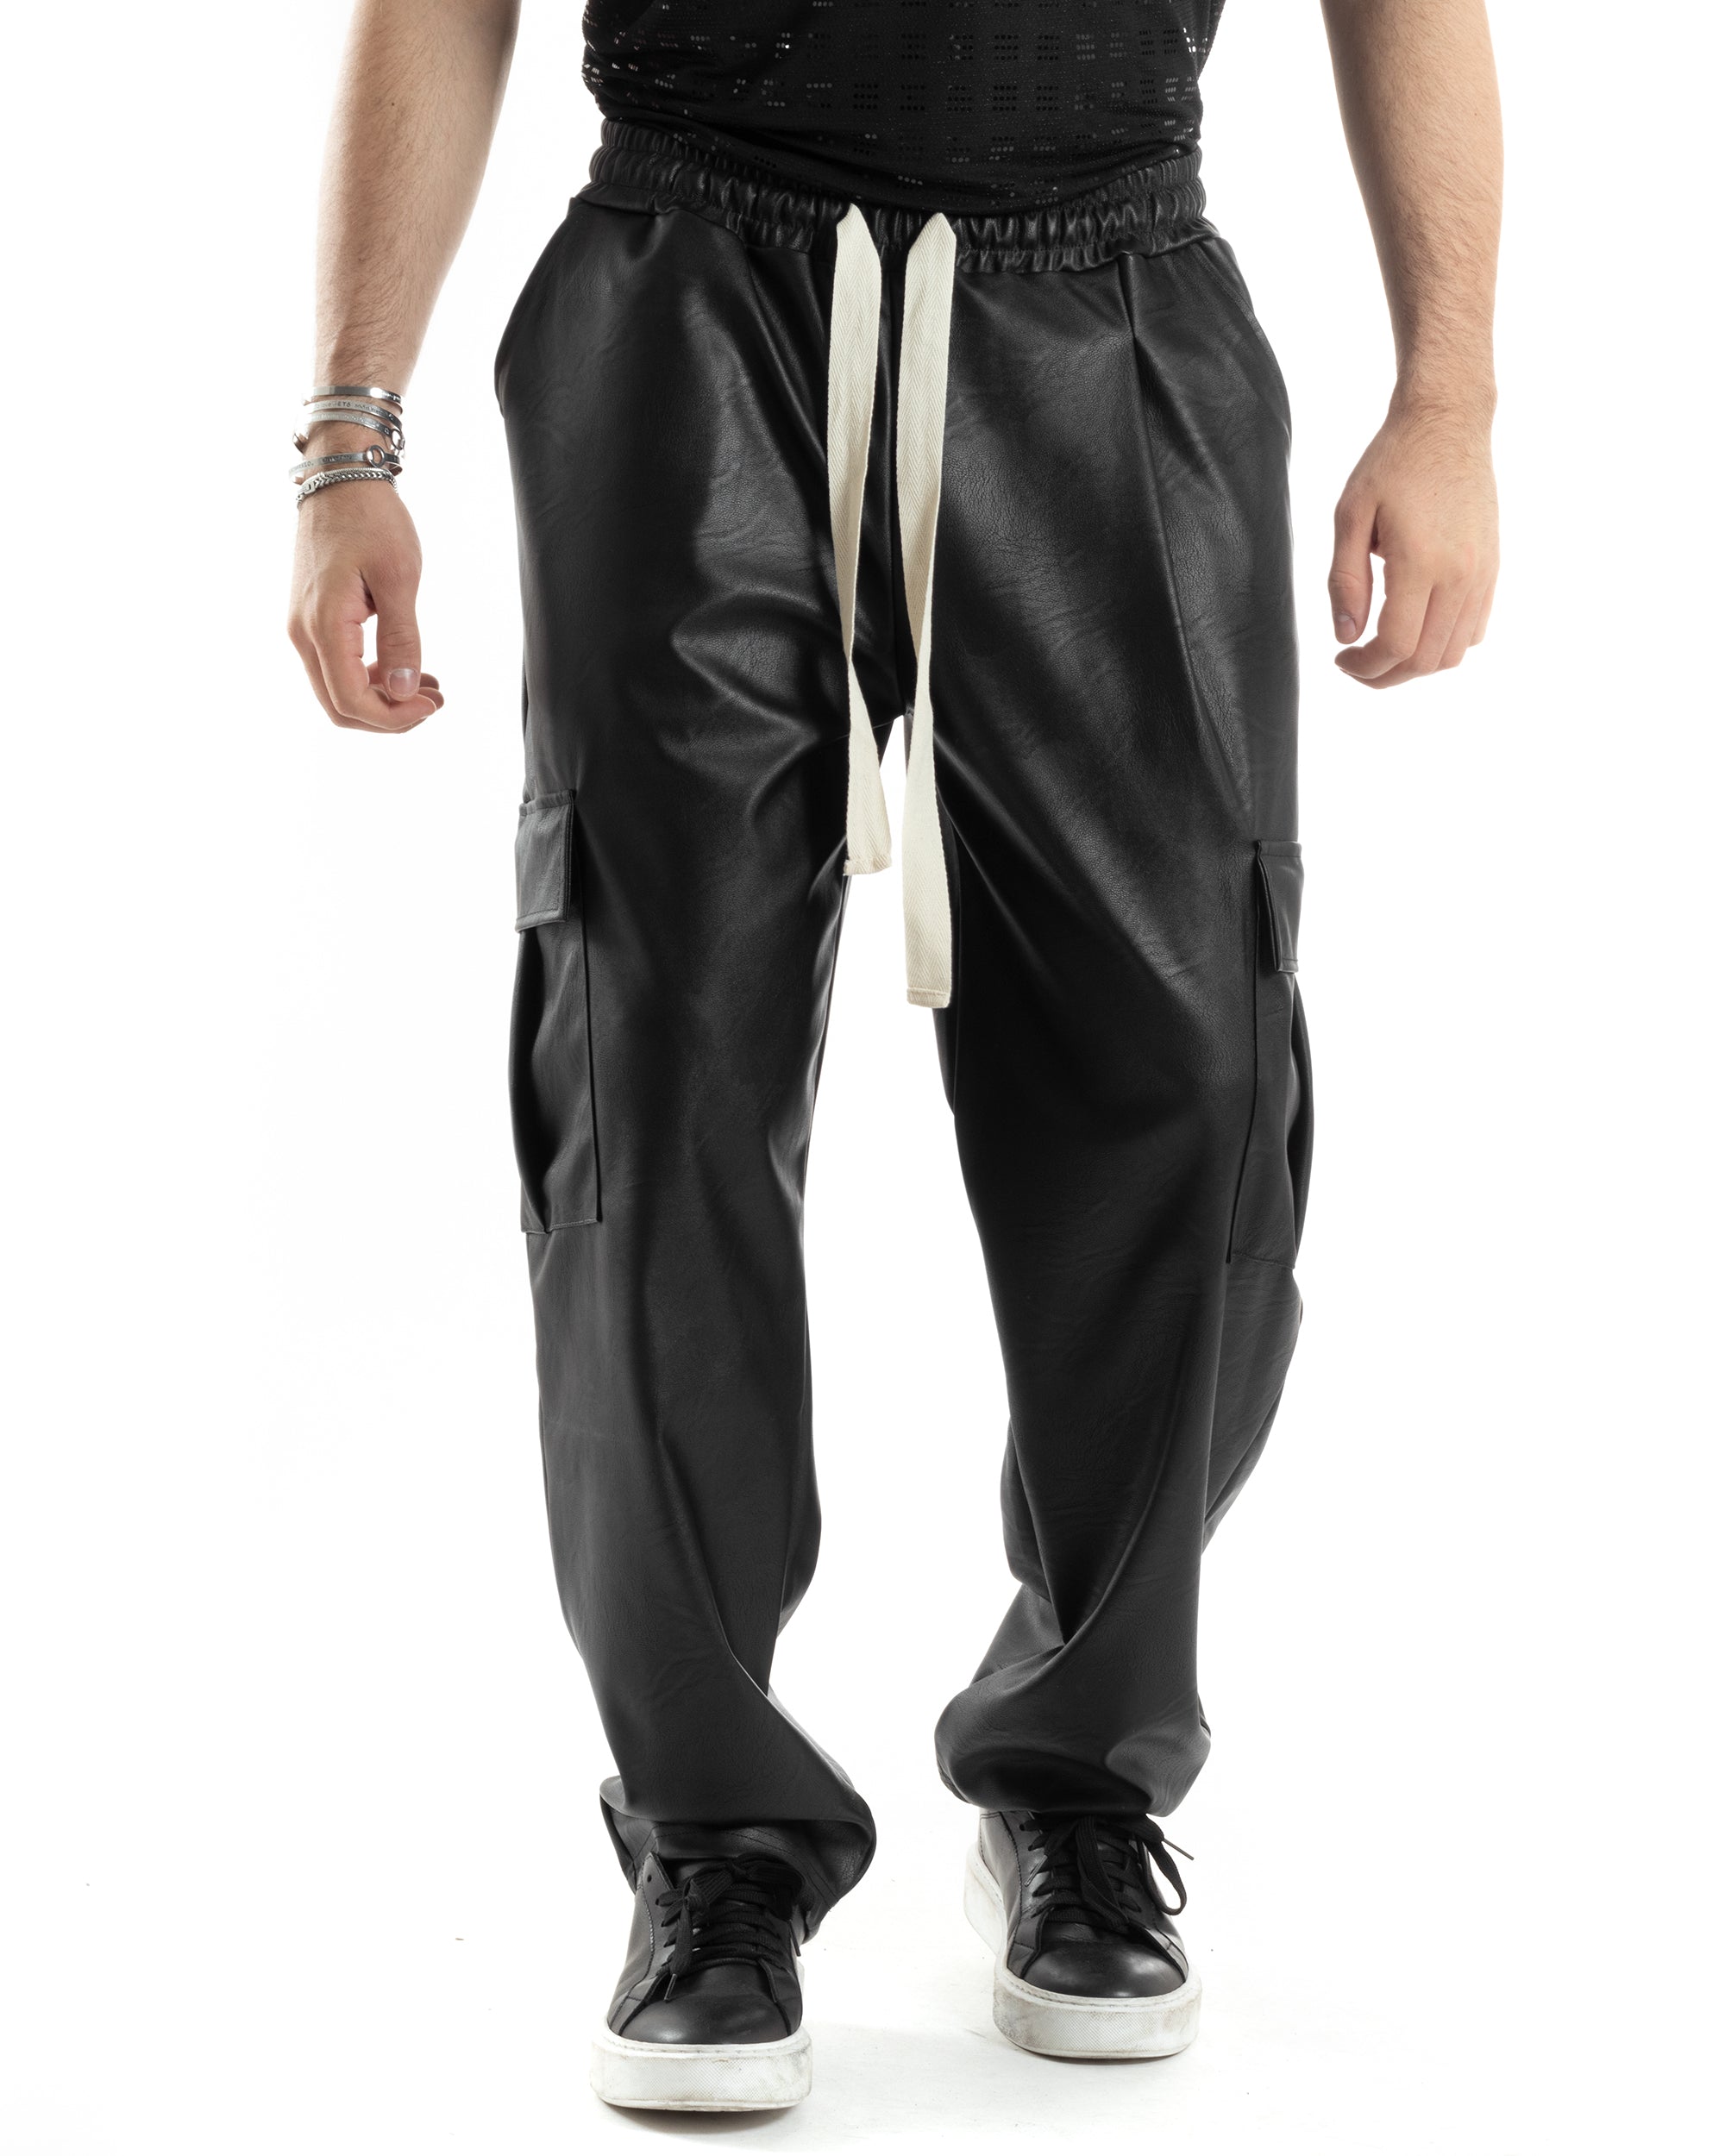 Men's Jeans Trousers Regular Fit Beige Trousers With Casual Rips GIOSAL-P3528A